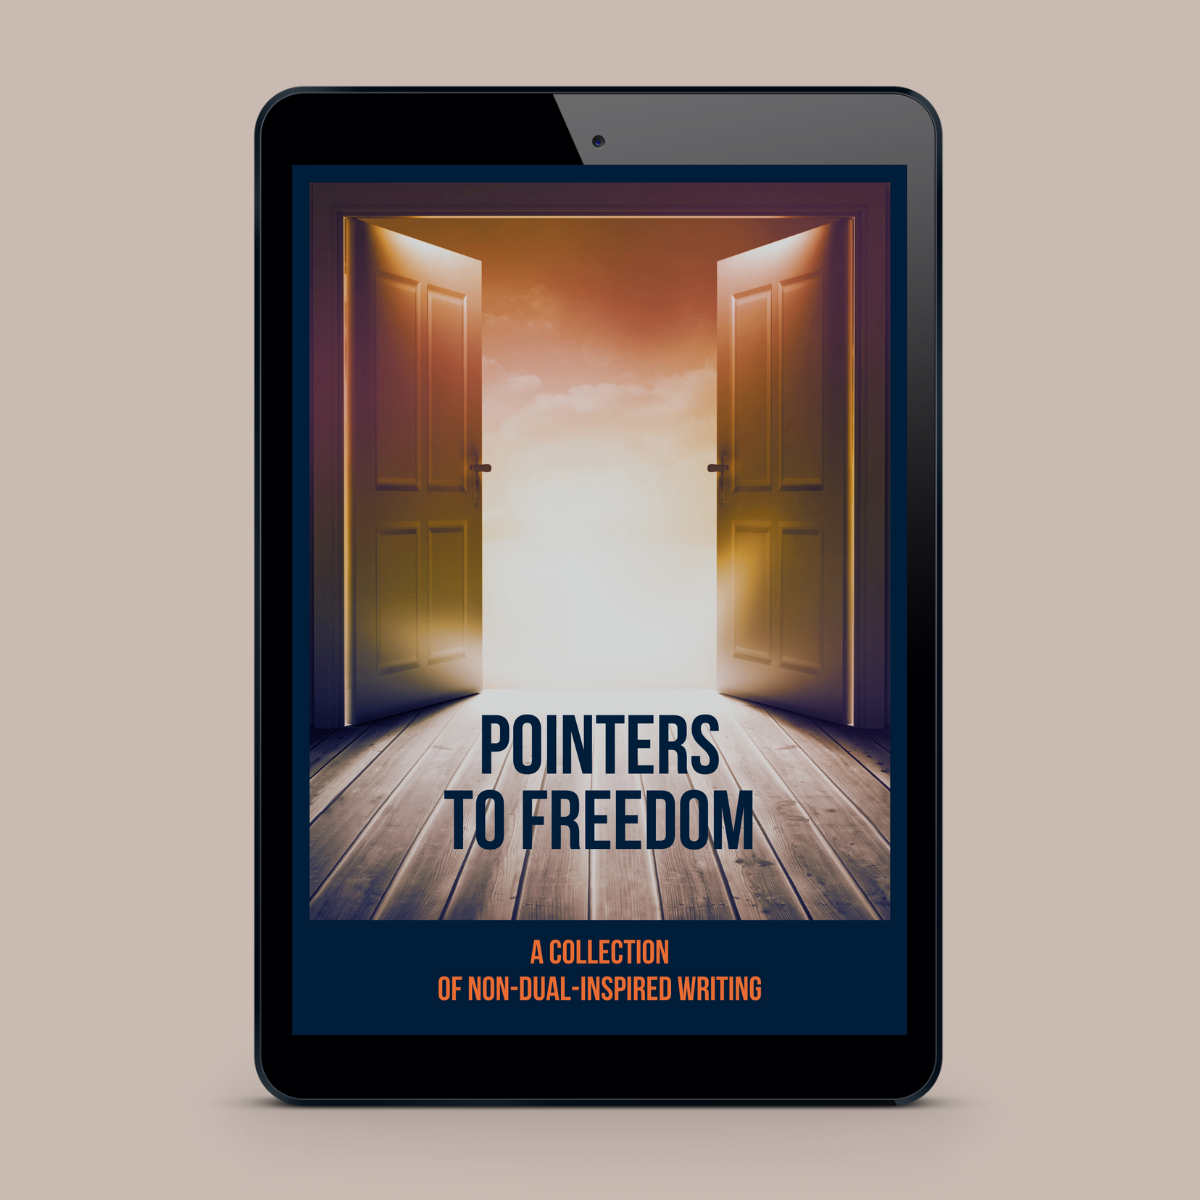 Cover pointers ebook image - no text